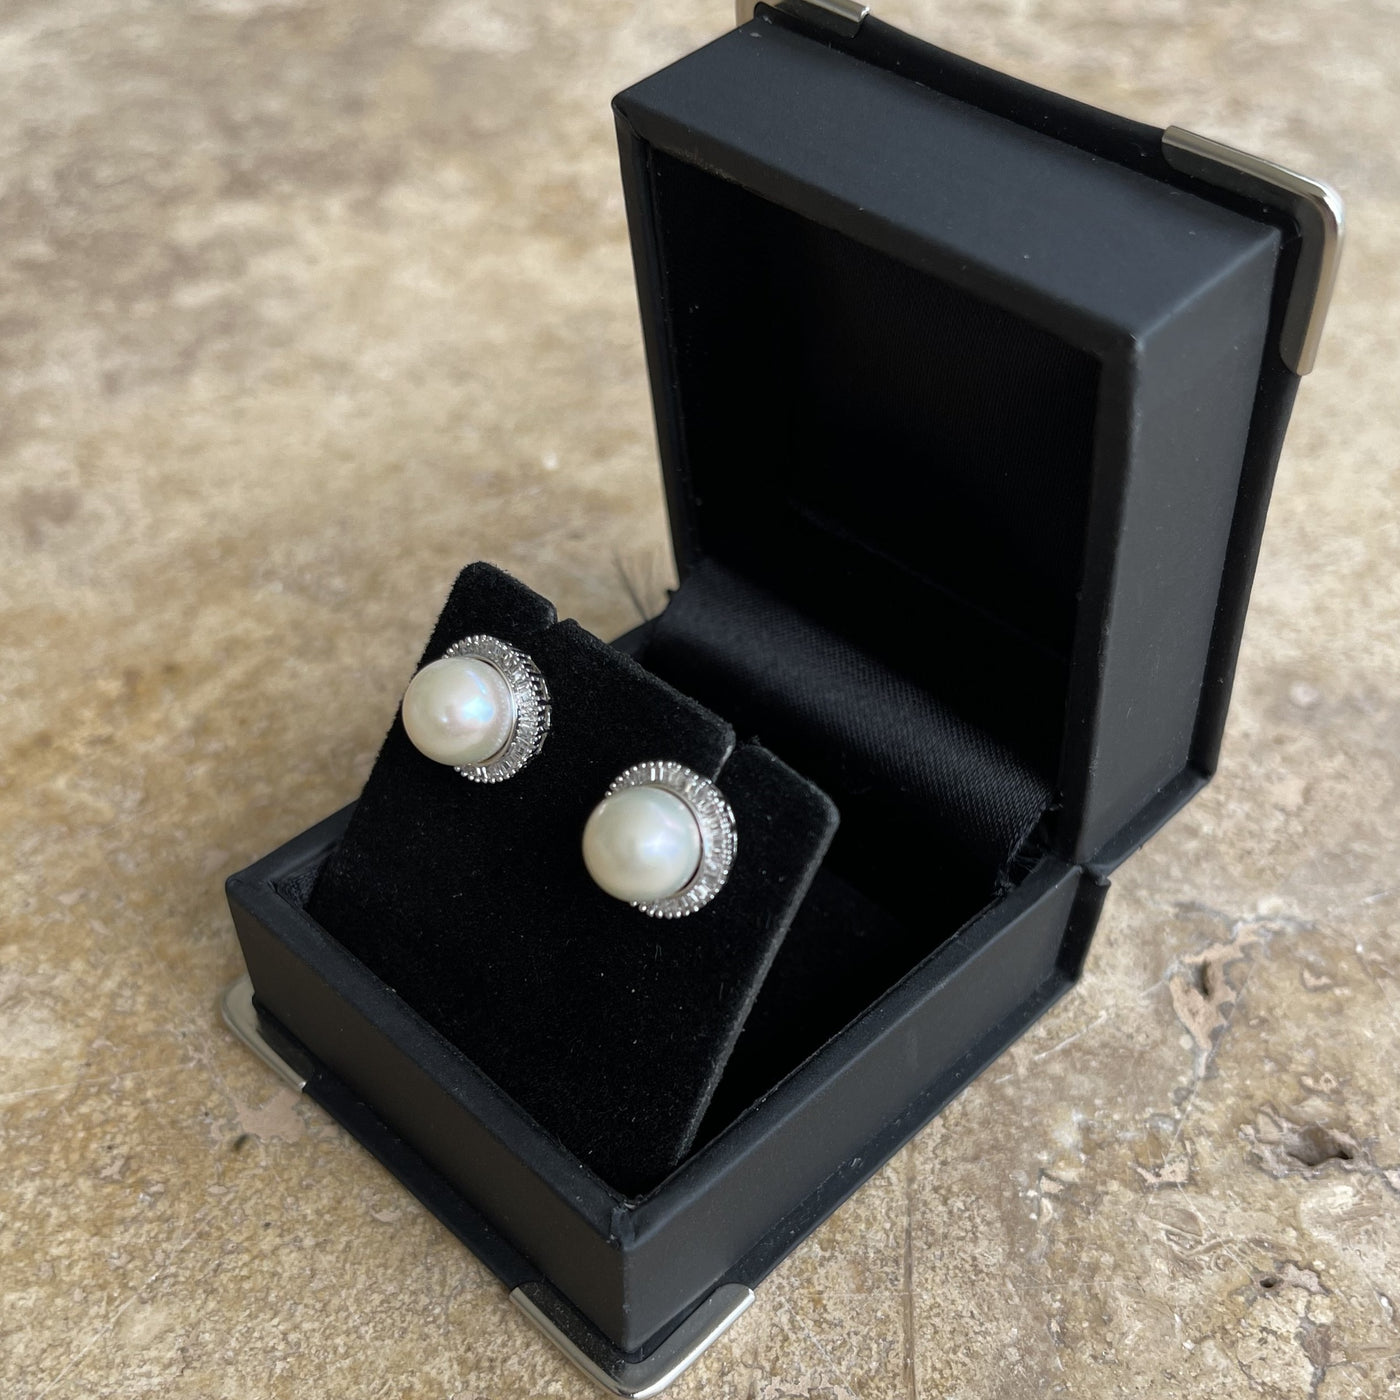 18CT White Gold Pearl and Diamond Stud Earrings